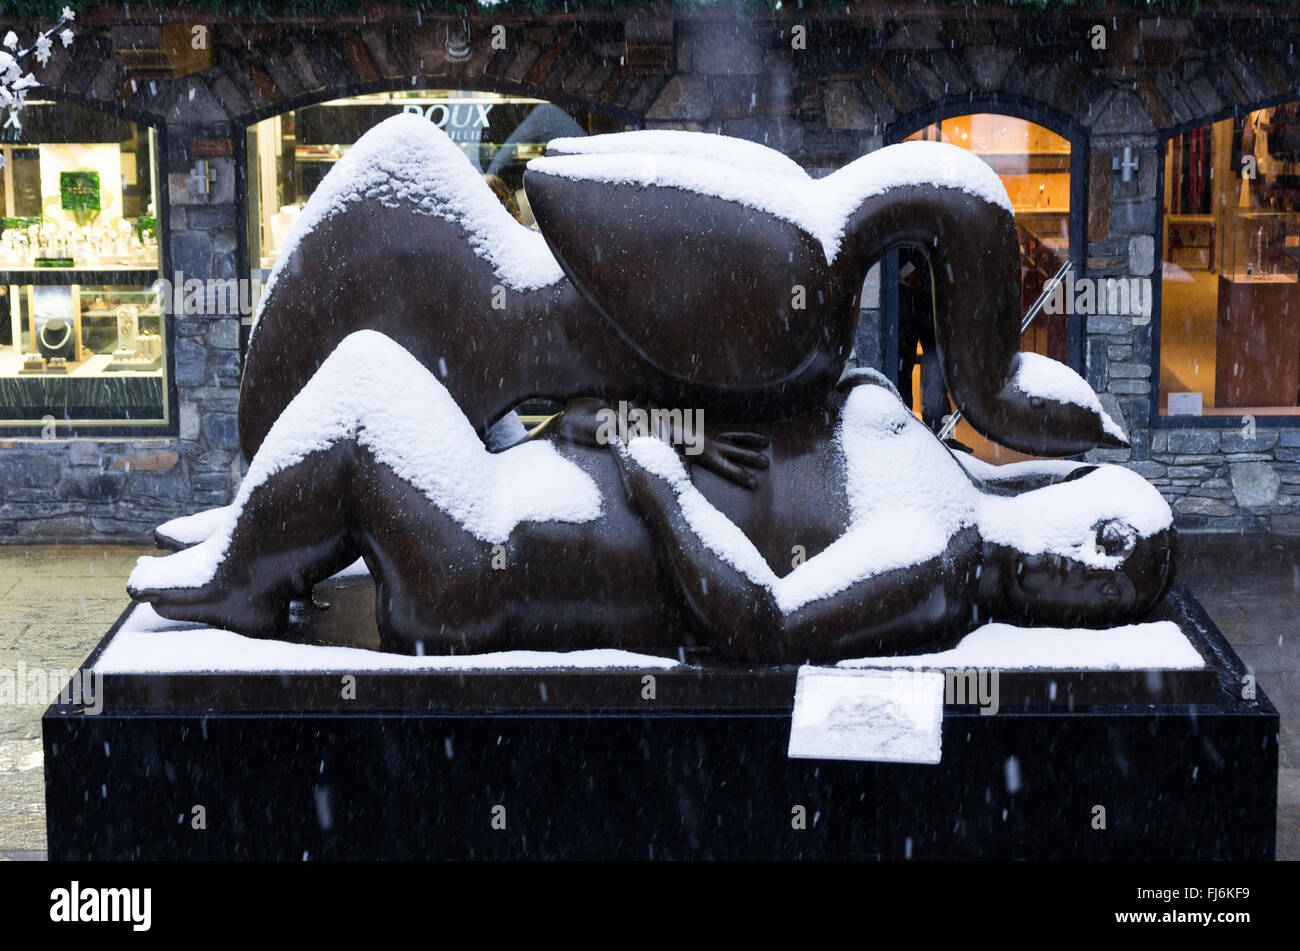 COURCHEVEL,FRANCE-JAN.11:   sculpture of colombian artist Botero is displayed in the street on the 11 of january 2011 in courchevel, France. The french resort has seen an invasion of Russian millionaire and oligarch in the last 10 years, especially coming for christmas period. Stock Photo